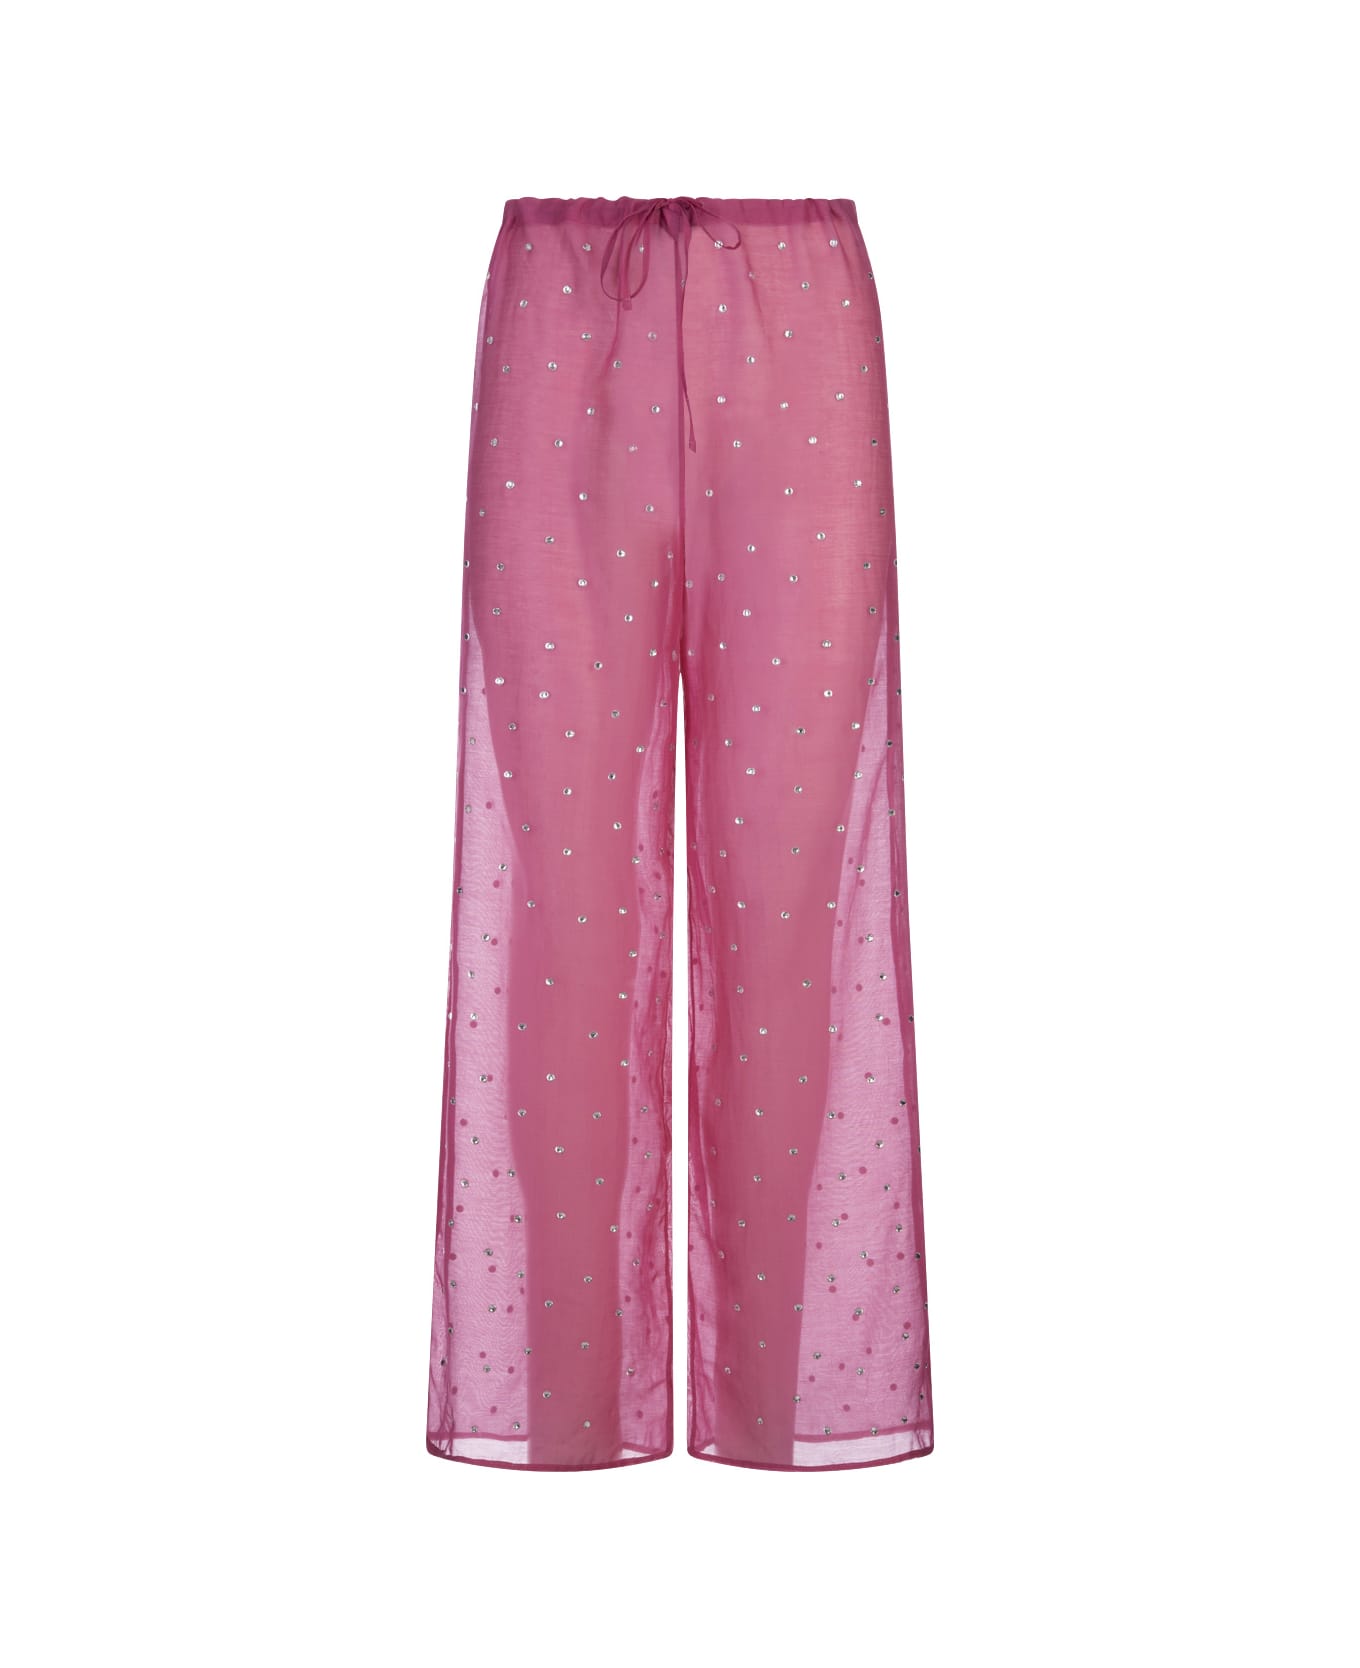 Oseree Flamingo Gem Trousers - Pink